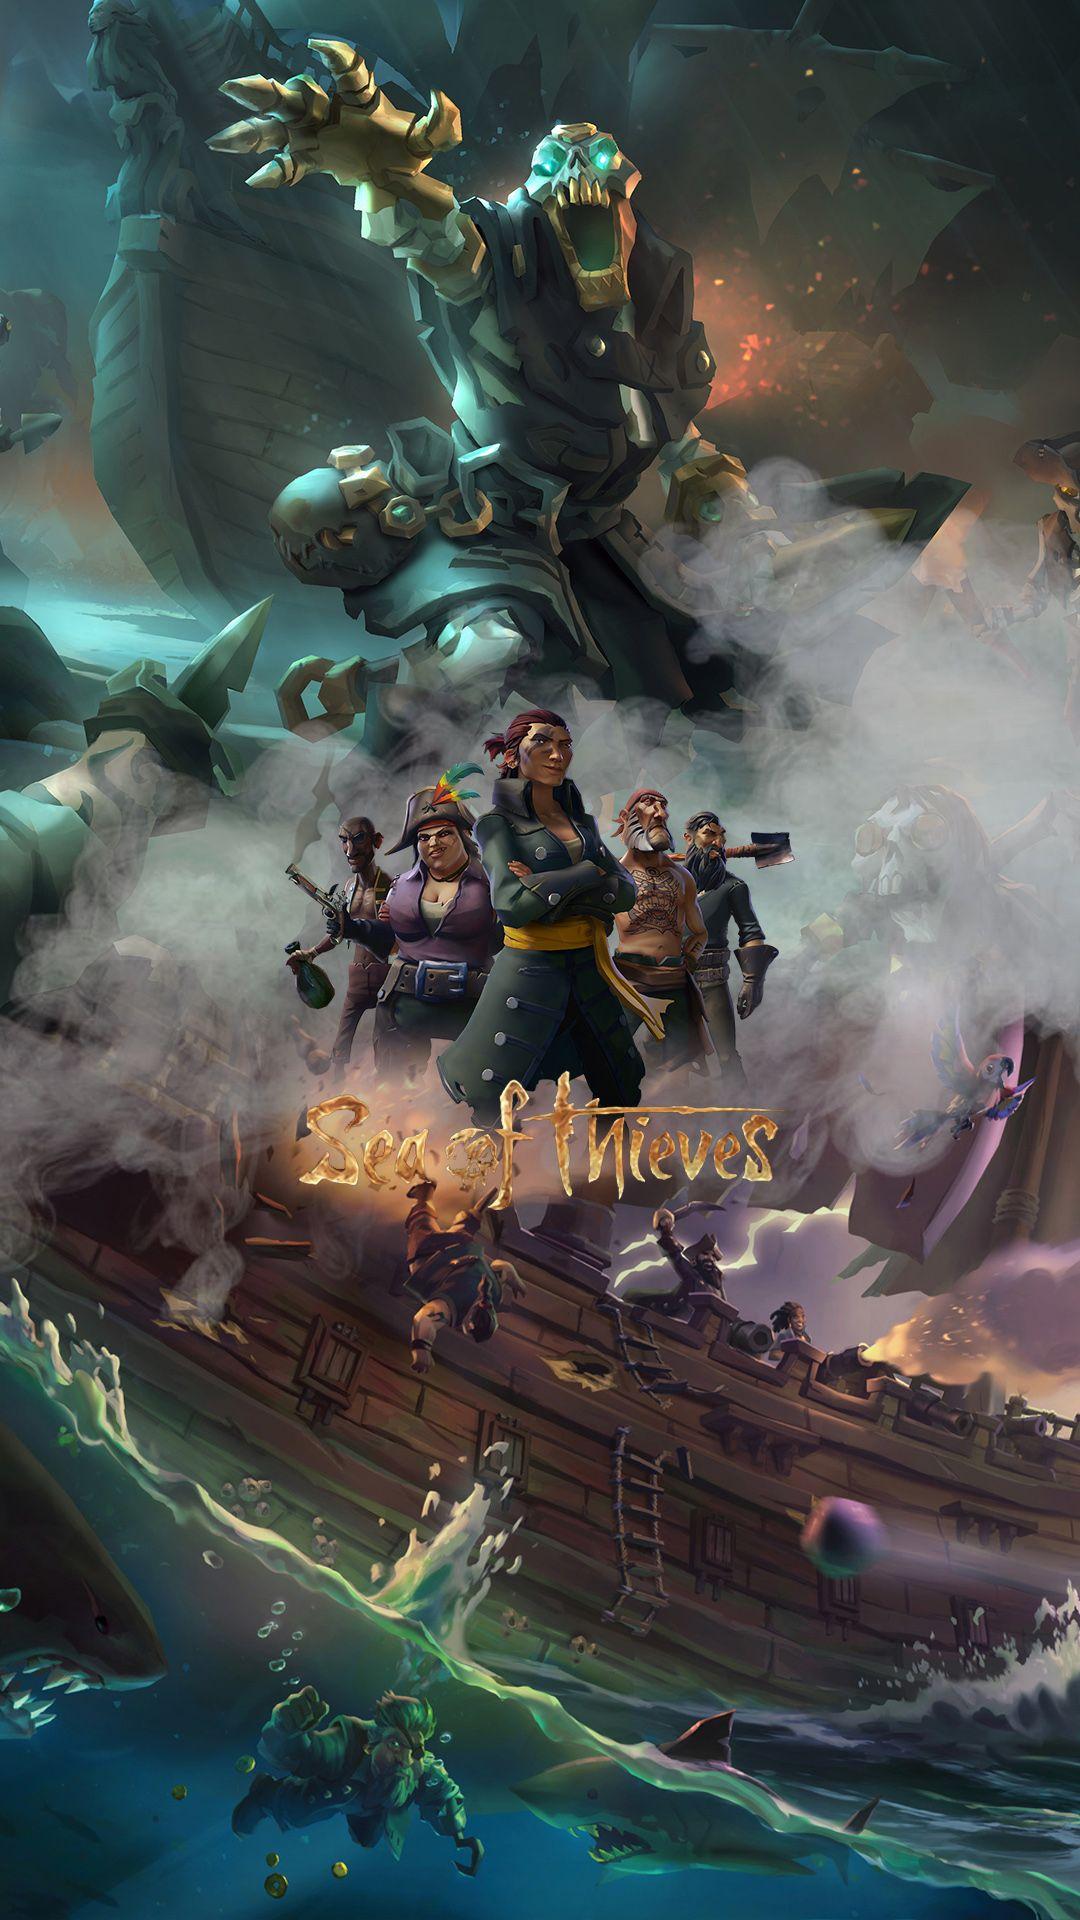 New Phone Wallpapers – Sea of thieves – Gaming Art